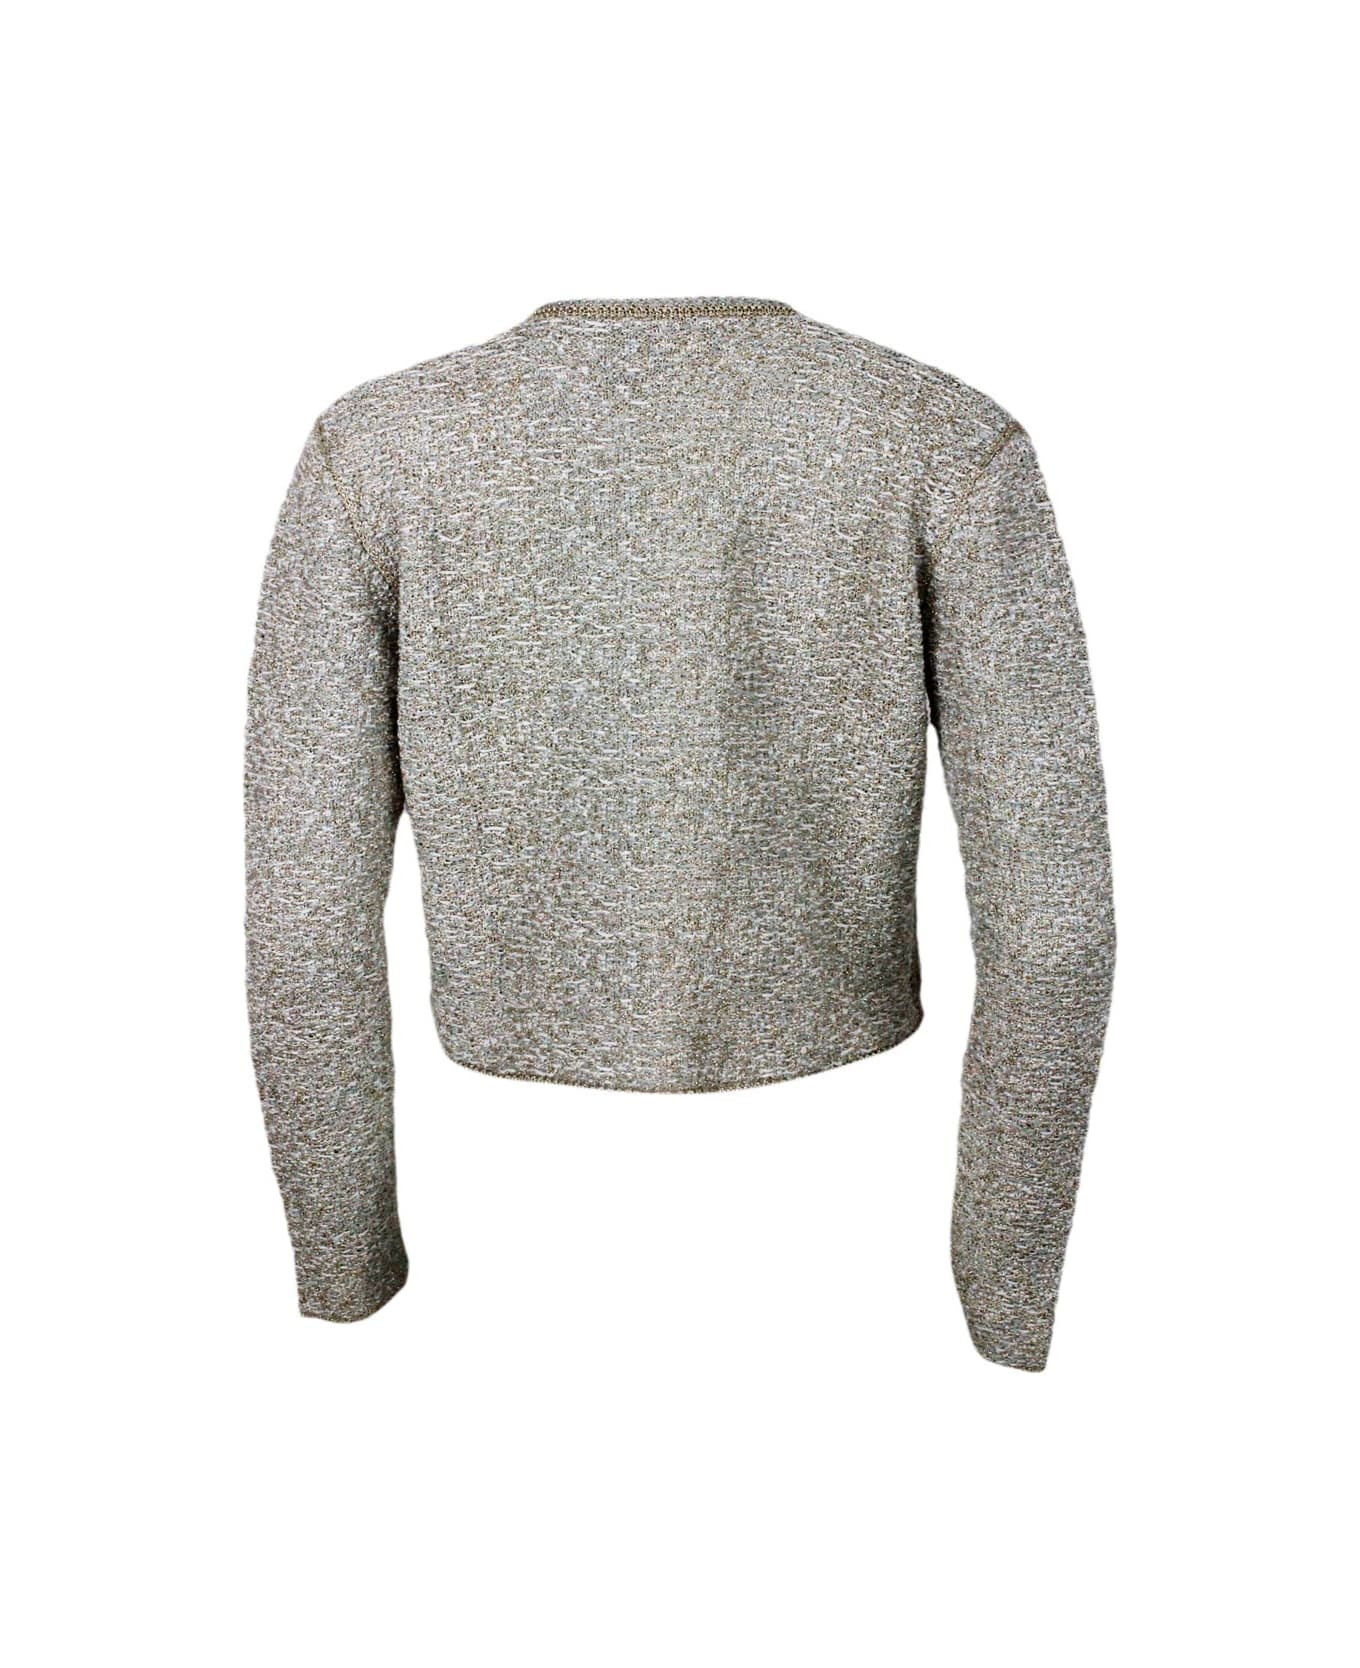 Fabiana Filippi Chanel-style Jacket Sweater Open On The Front And With Hook Closure Embellished With Bright Lurex Threads - Grigio Chiaro/Bianco/Oro